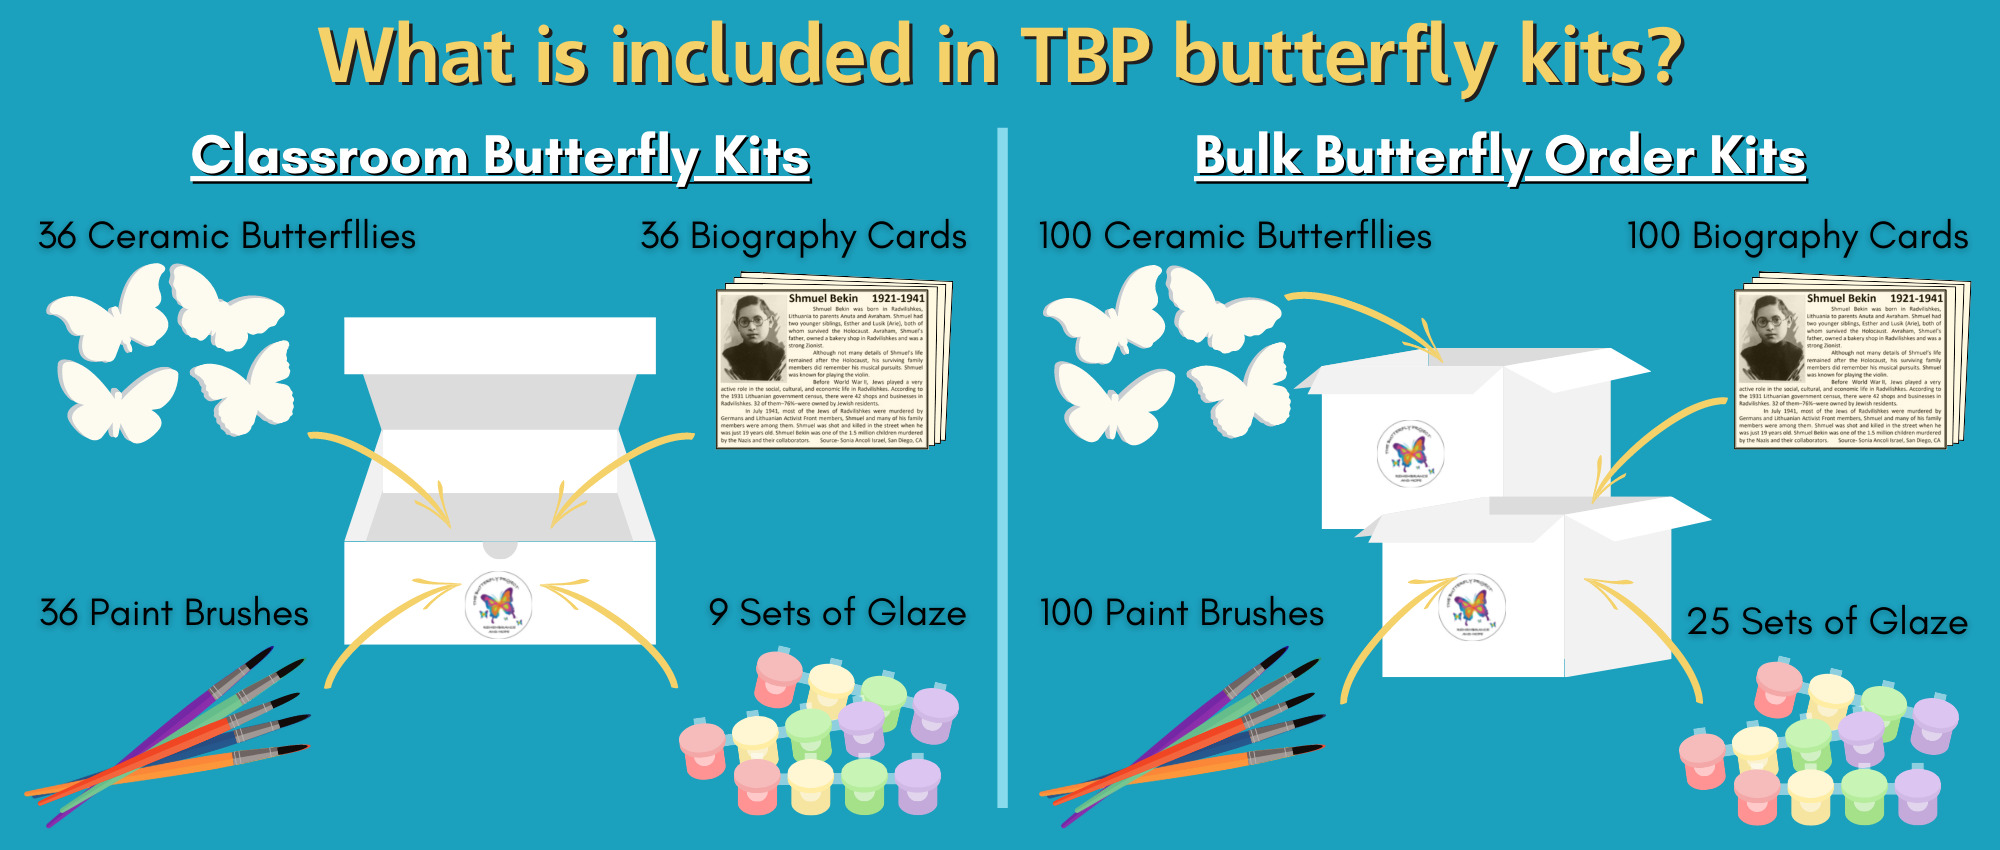 What is Included in TBP butterfly Kits | The Butterfly Project